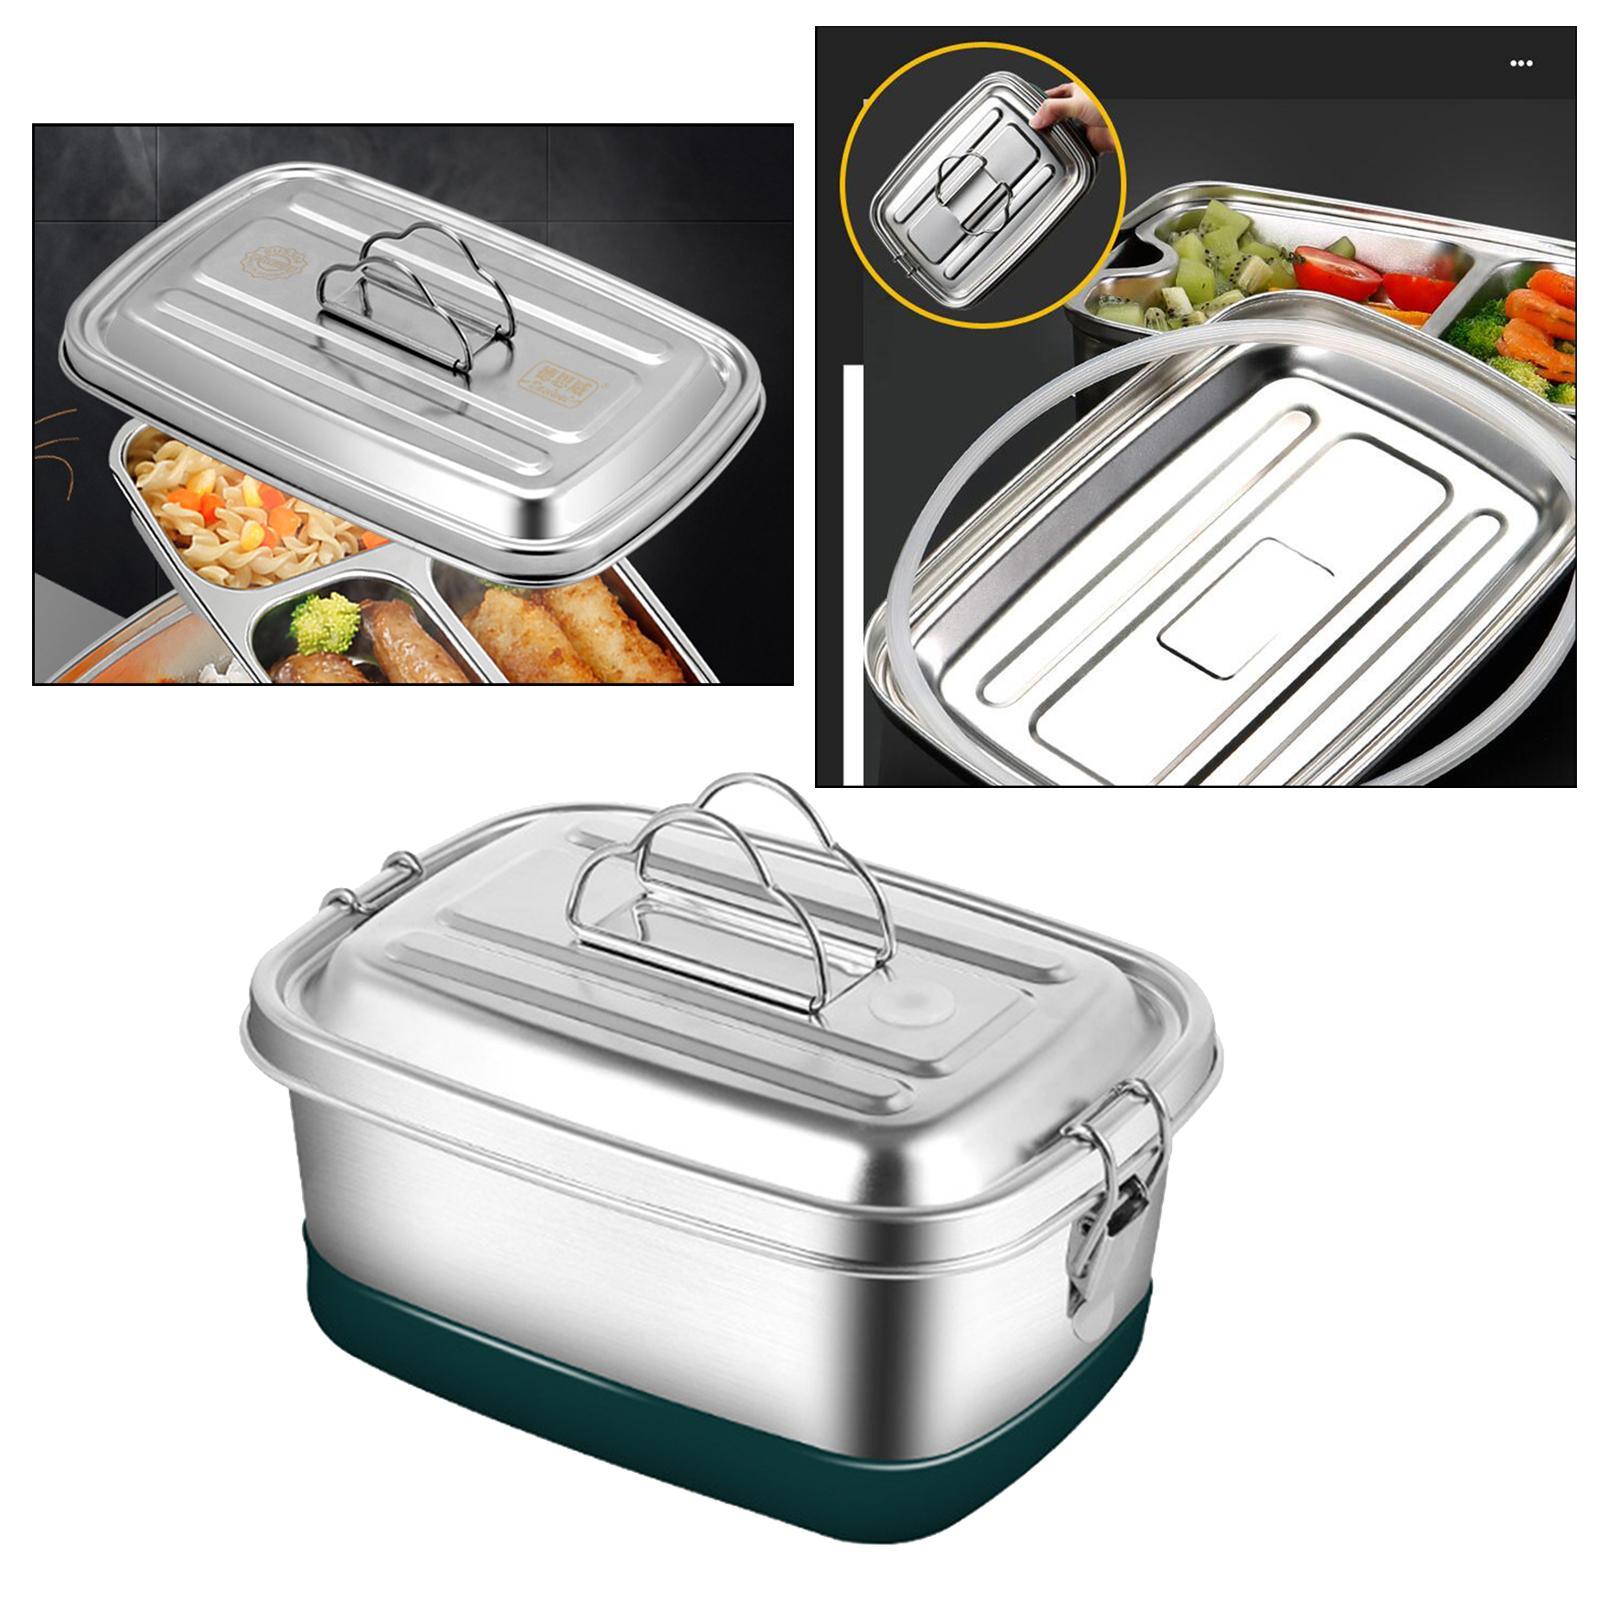 2X 304 Stainless Steel Bento Box Lunch Box Food Container 1200ml